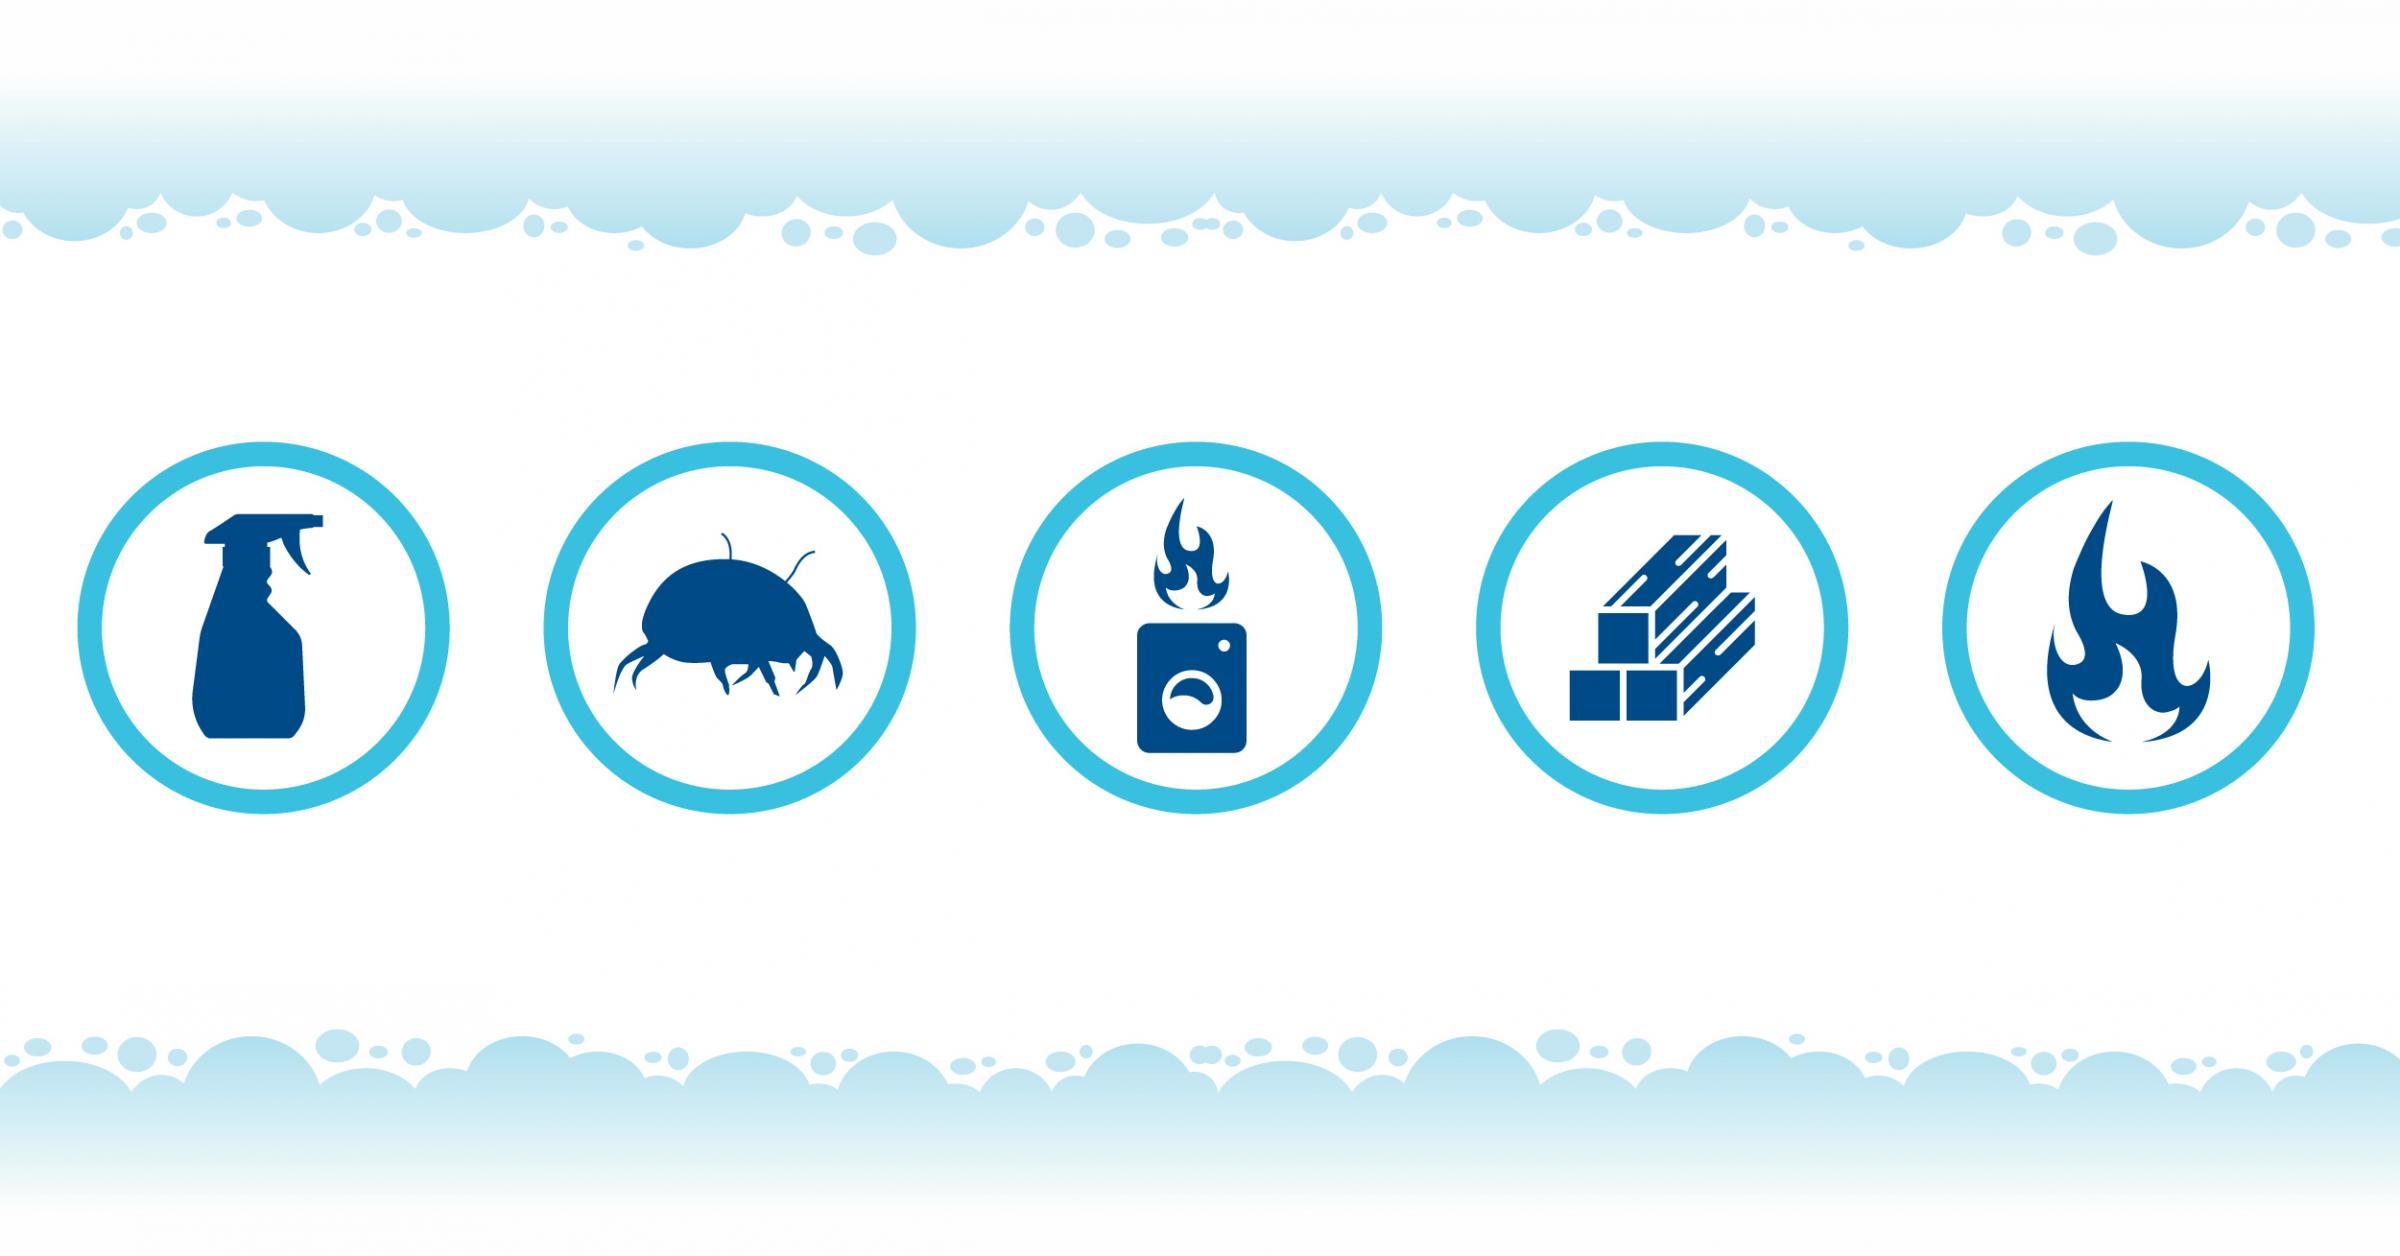 Emblems of the 5 most common sources of indoor air pollution